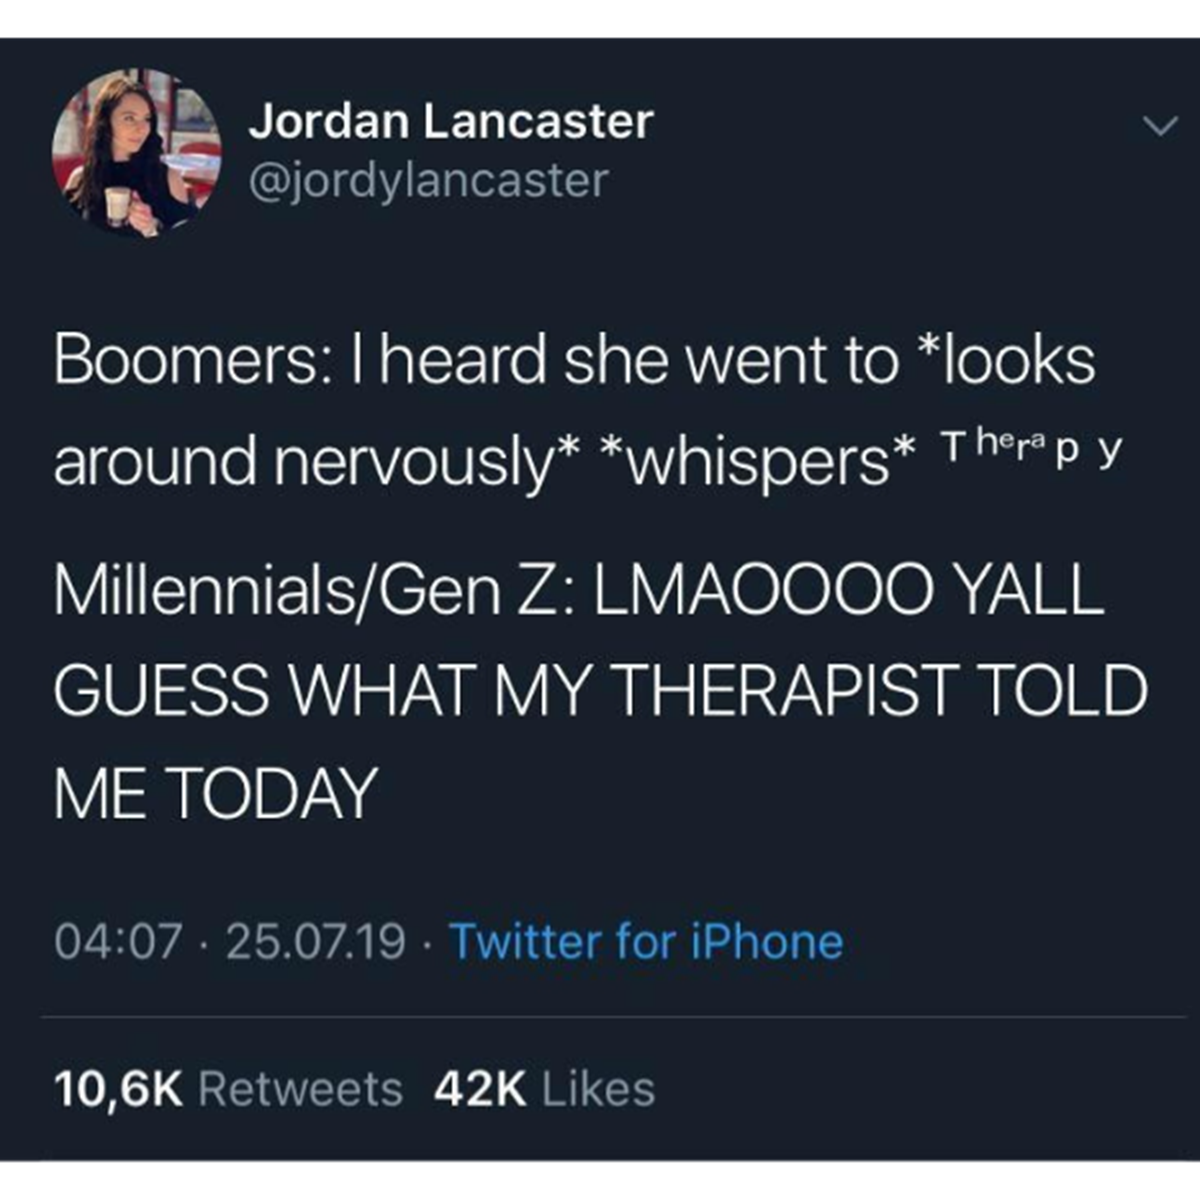 screenshot - Jordan Lancaster Boomers I heard she went to looks around nervously whispers Therapy MillennialsGen Z Lmaoooo Yall Guess What My Therapist Told Me Today 25.07.19 Twitter for iPhone 42K